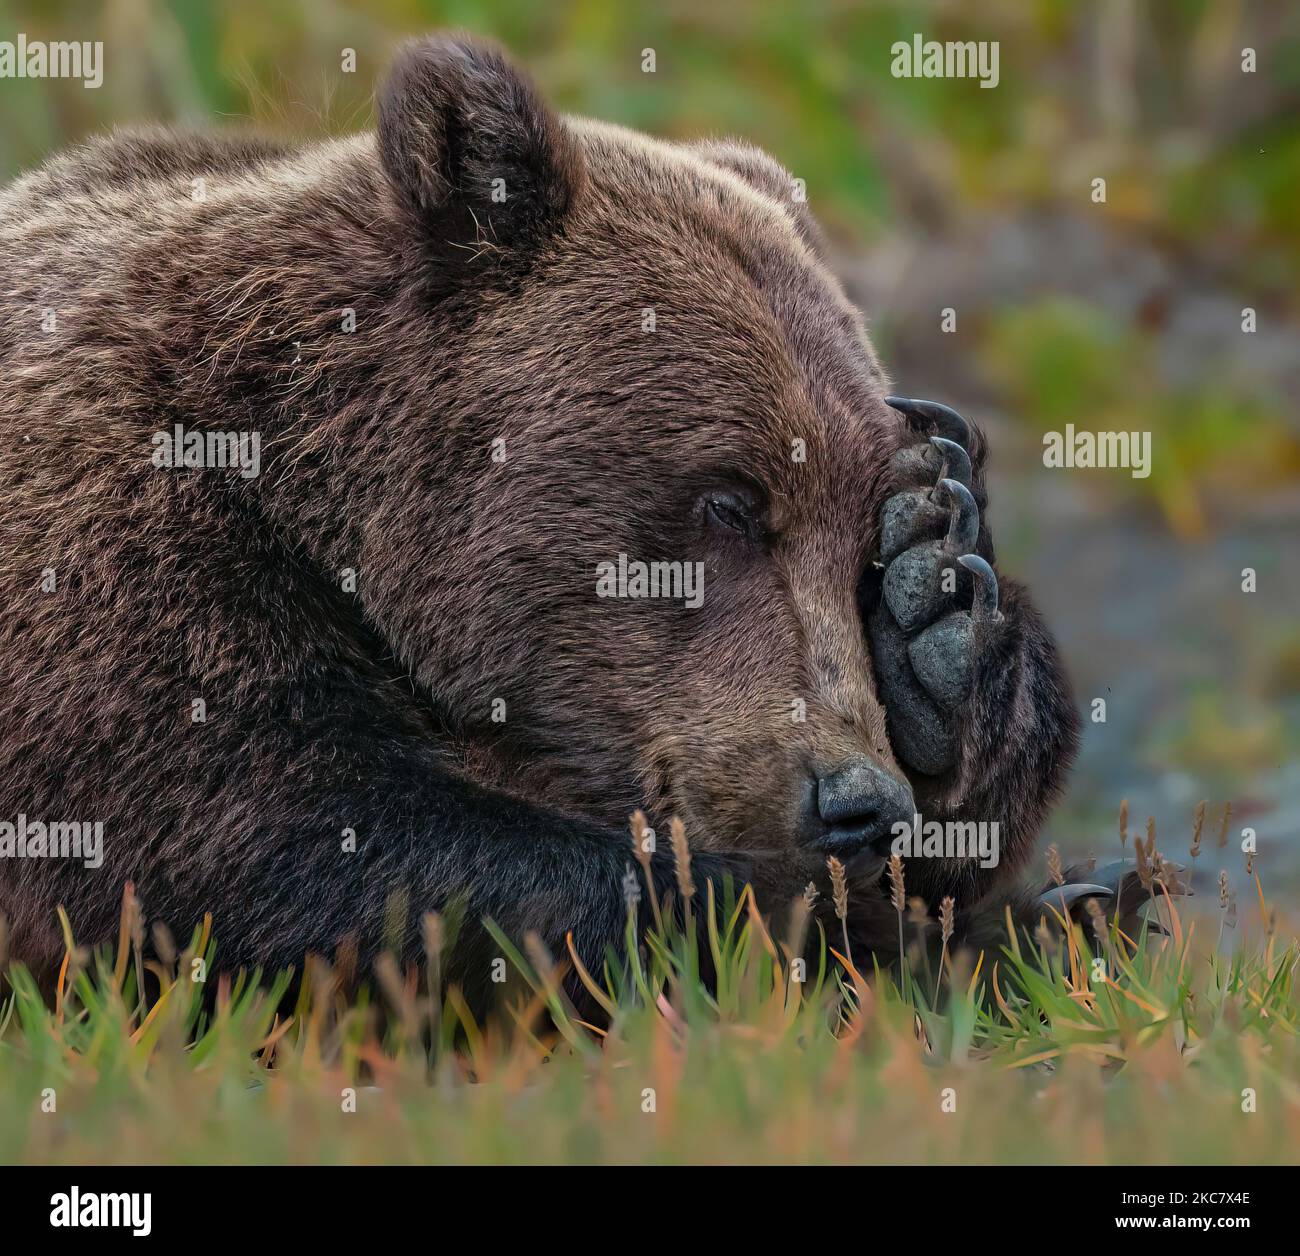 A wild Alaska Peninsula brown bear sitting on the ground in a rural area in daylight Stock Photo